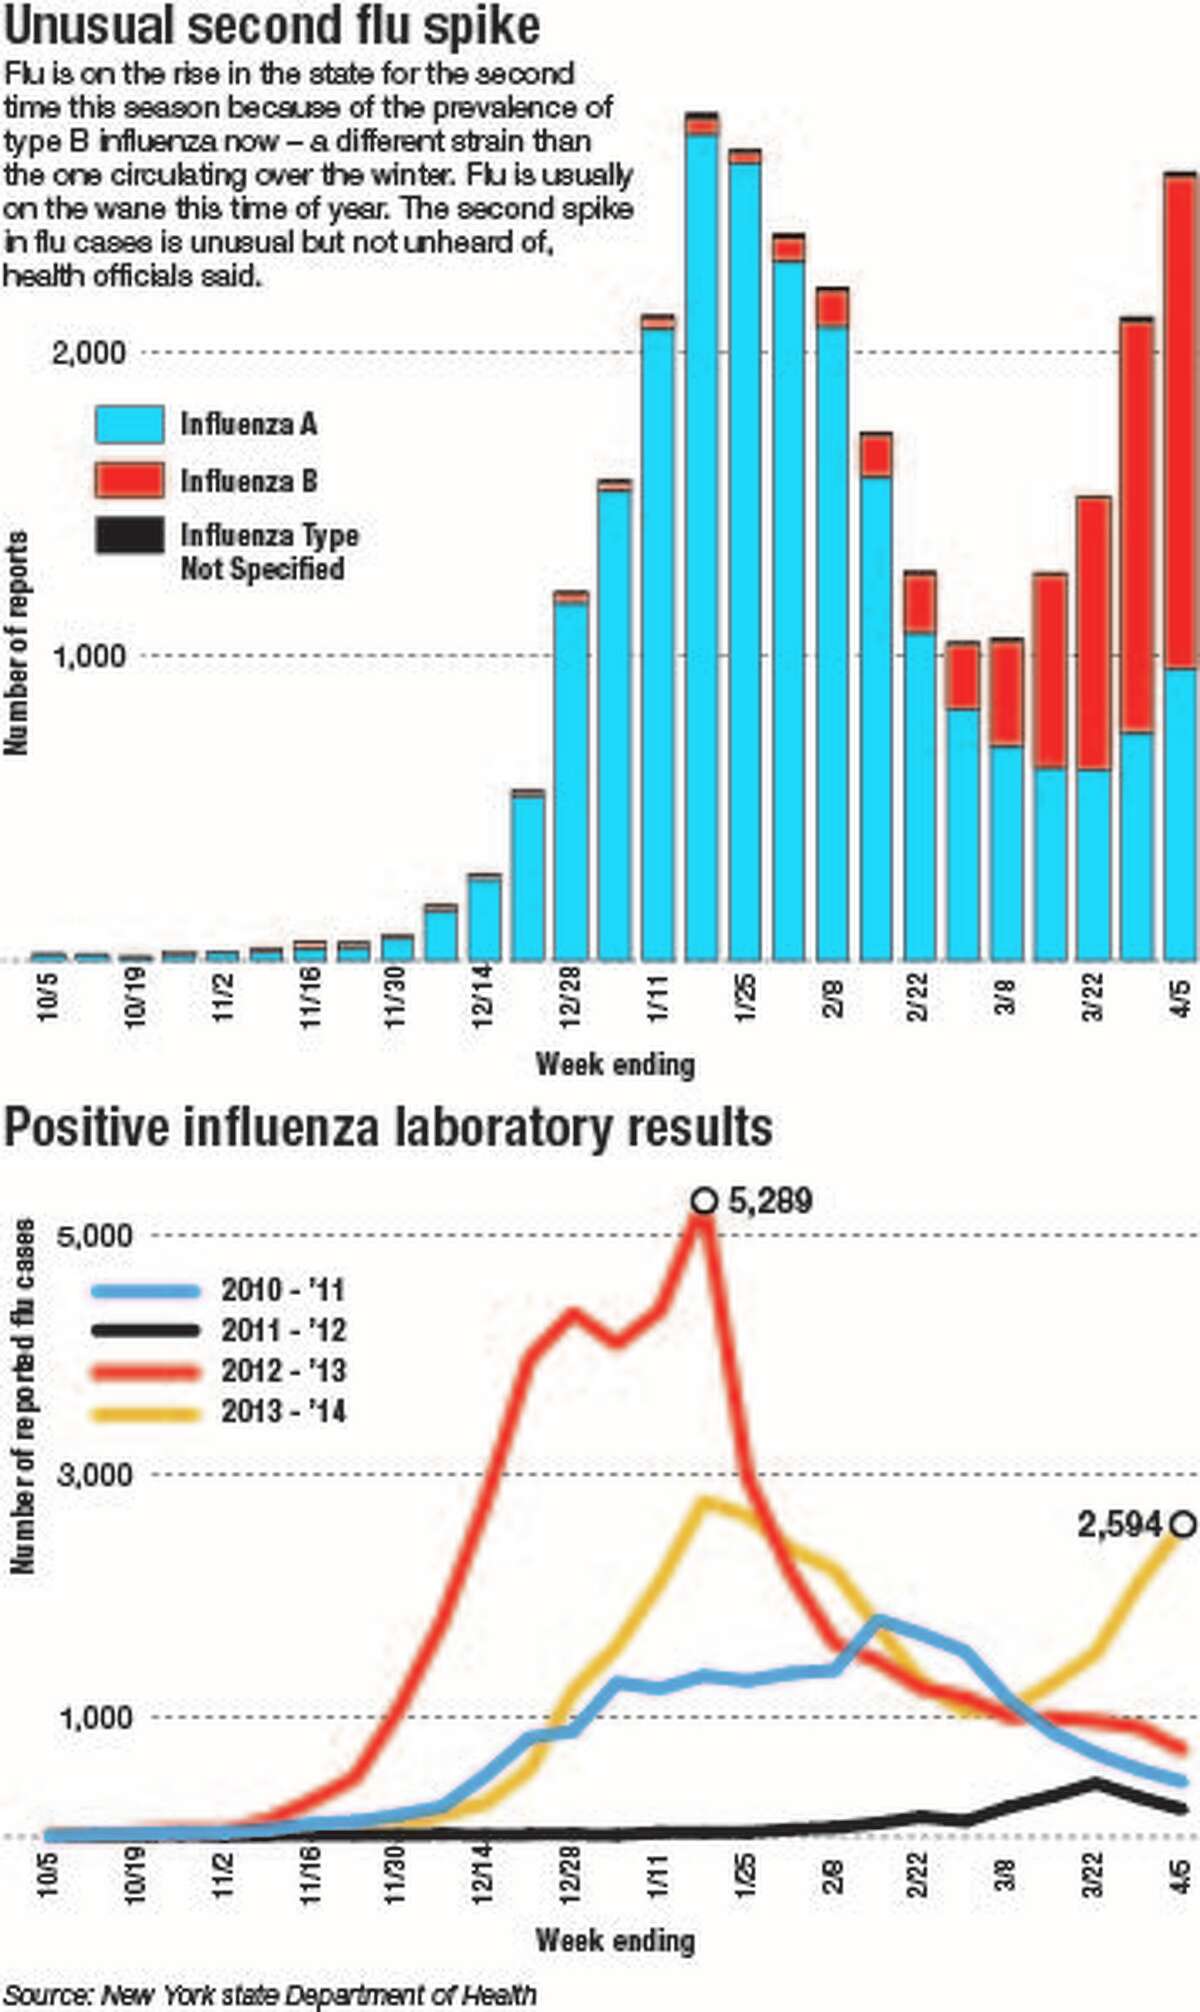 Second flu spike in New York is unusual, but not unheard of, health officials say. Graphic by Jeff Boyer/Times Union